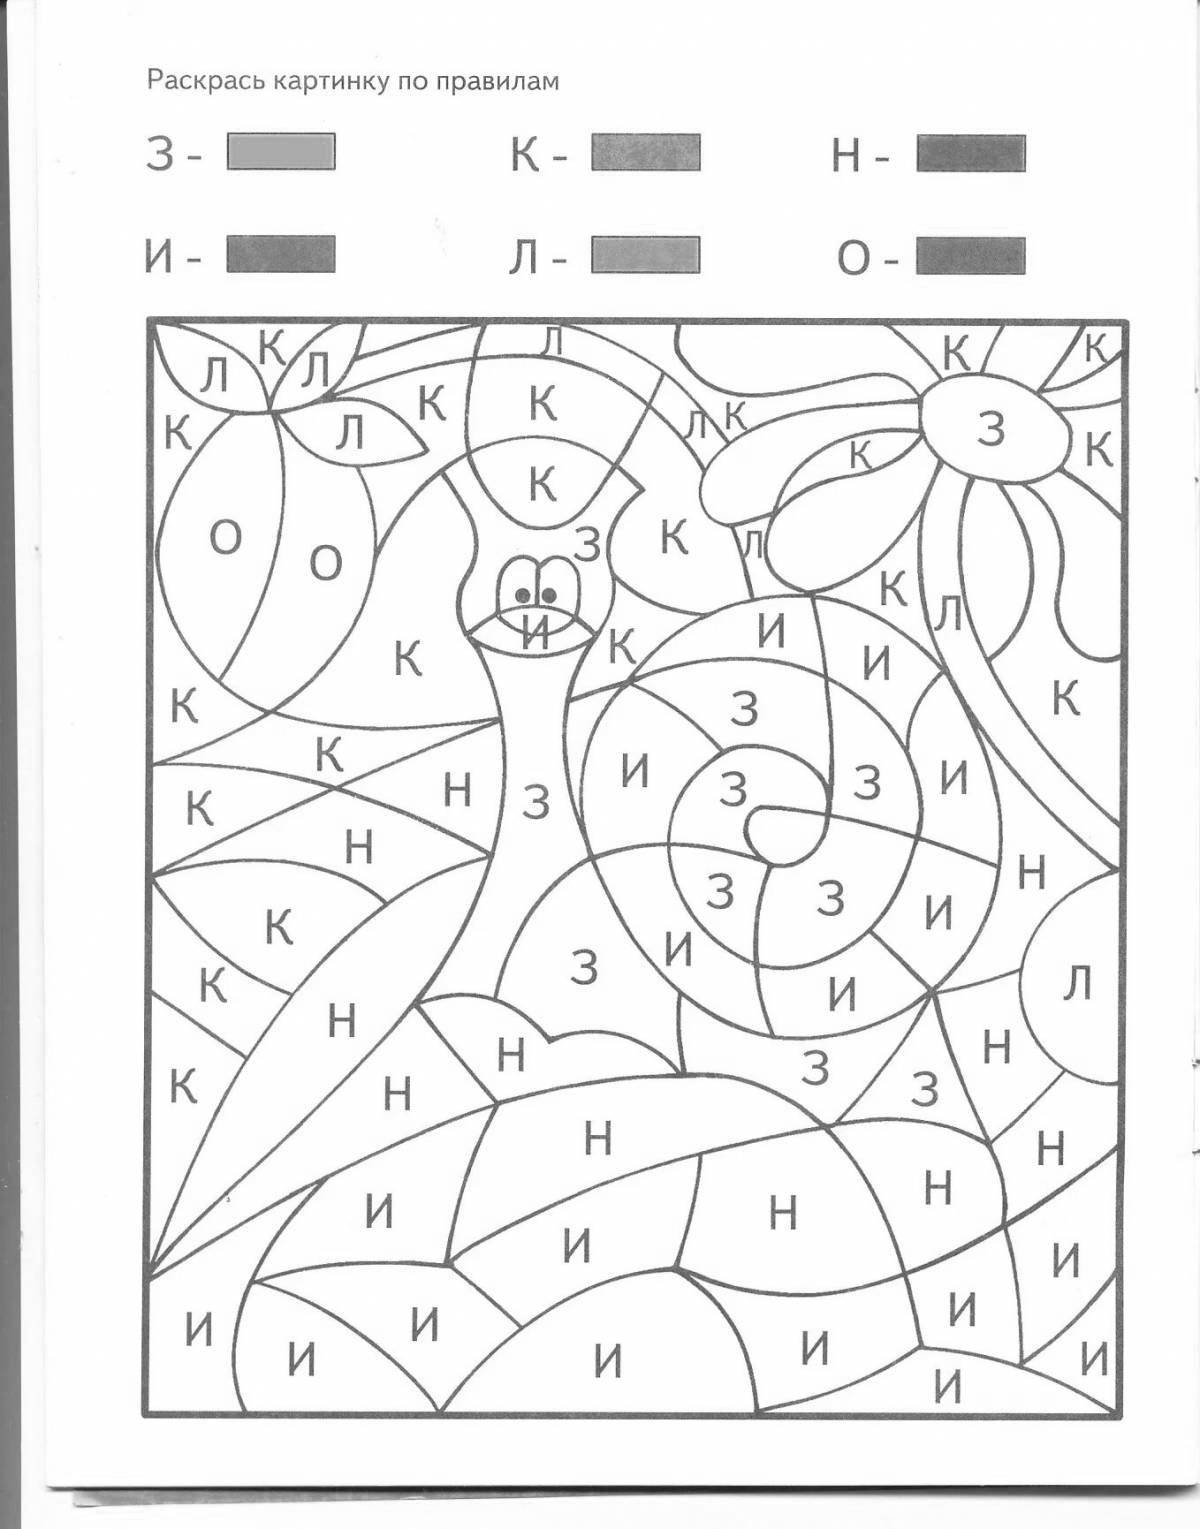 Entertaining syllabic coloring for preschoolers 6-7 years old